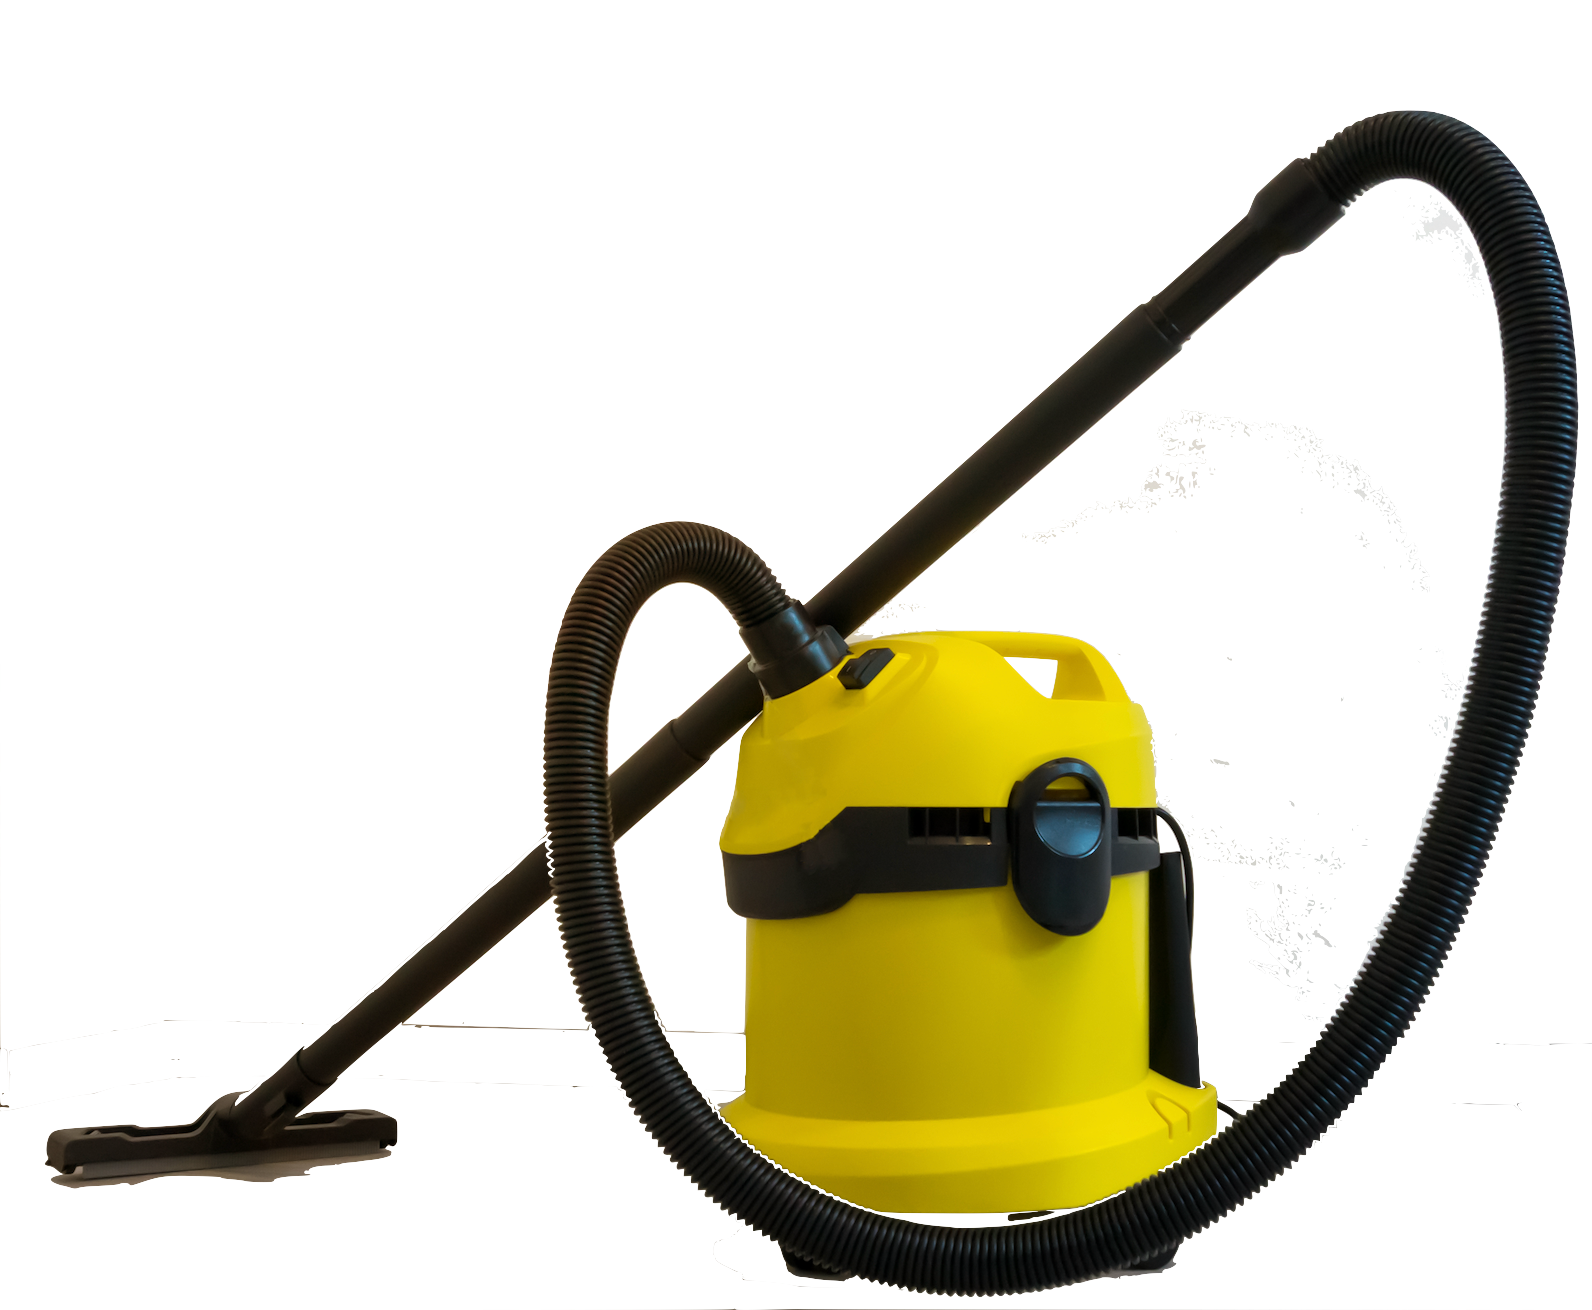 A yellow vacuum cleaner with a black hose attached to it